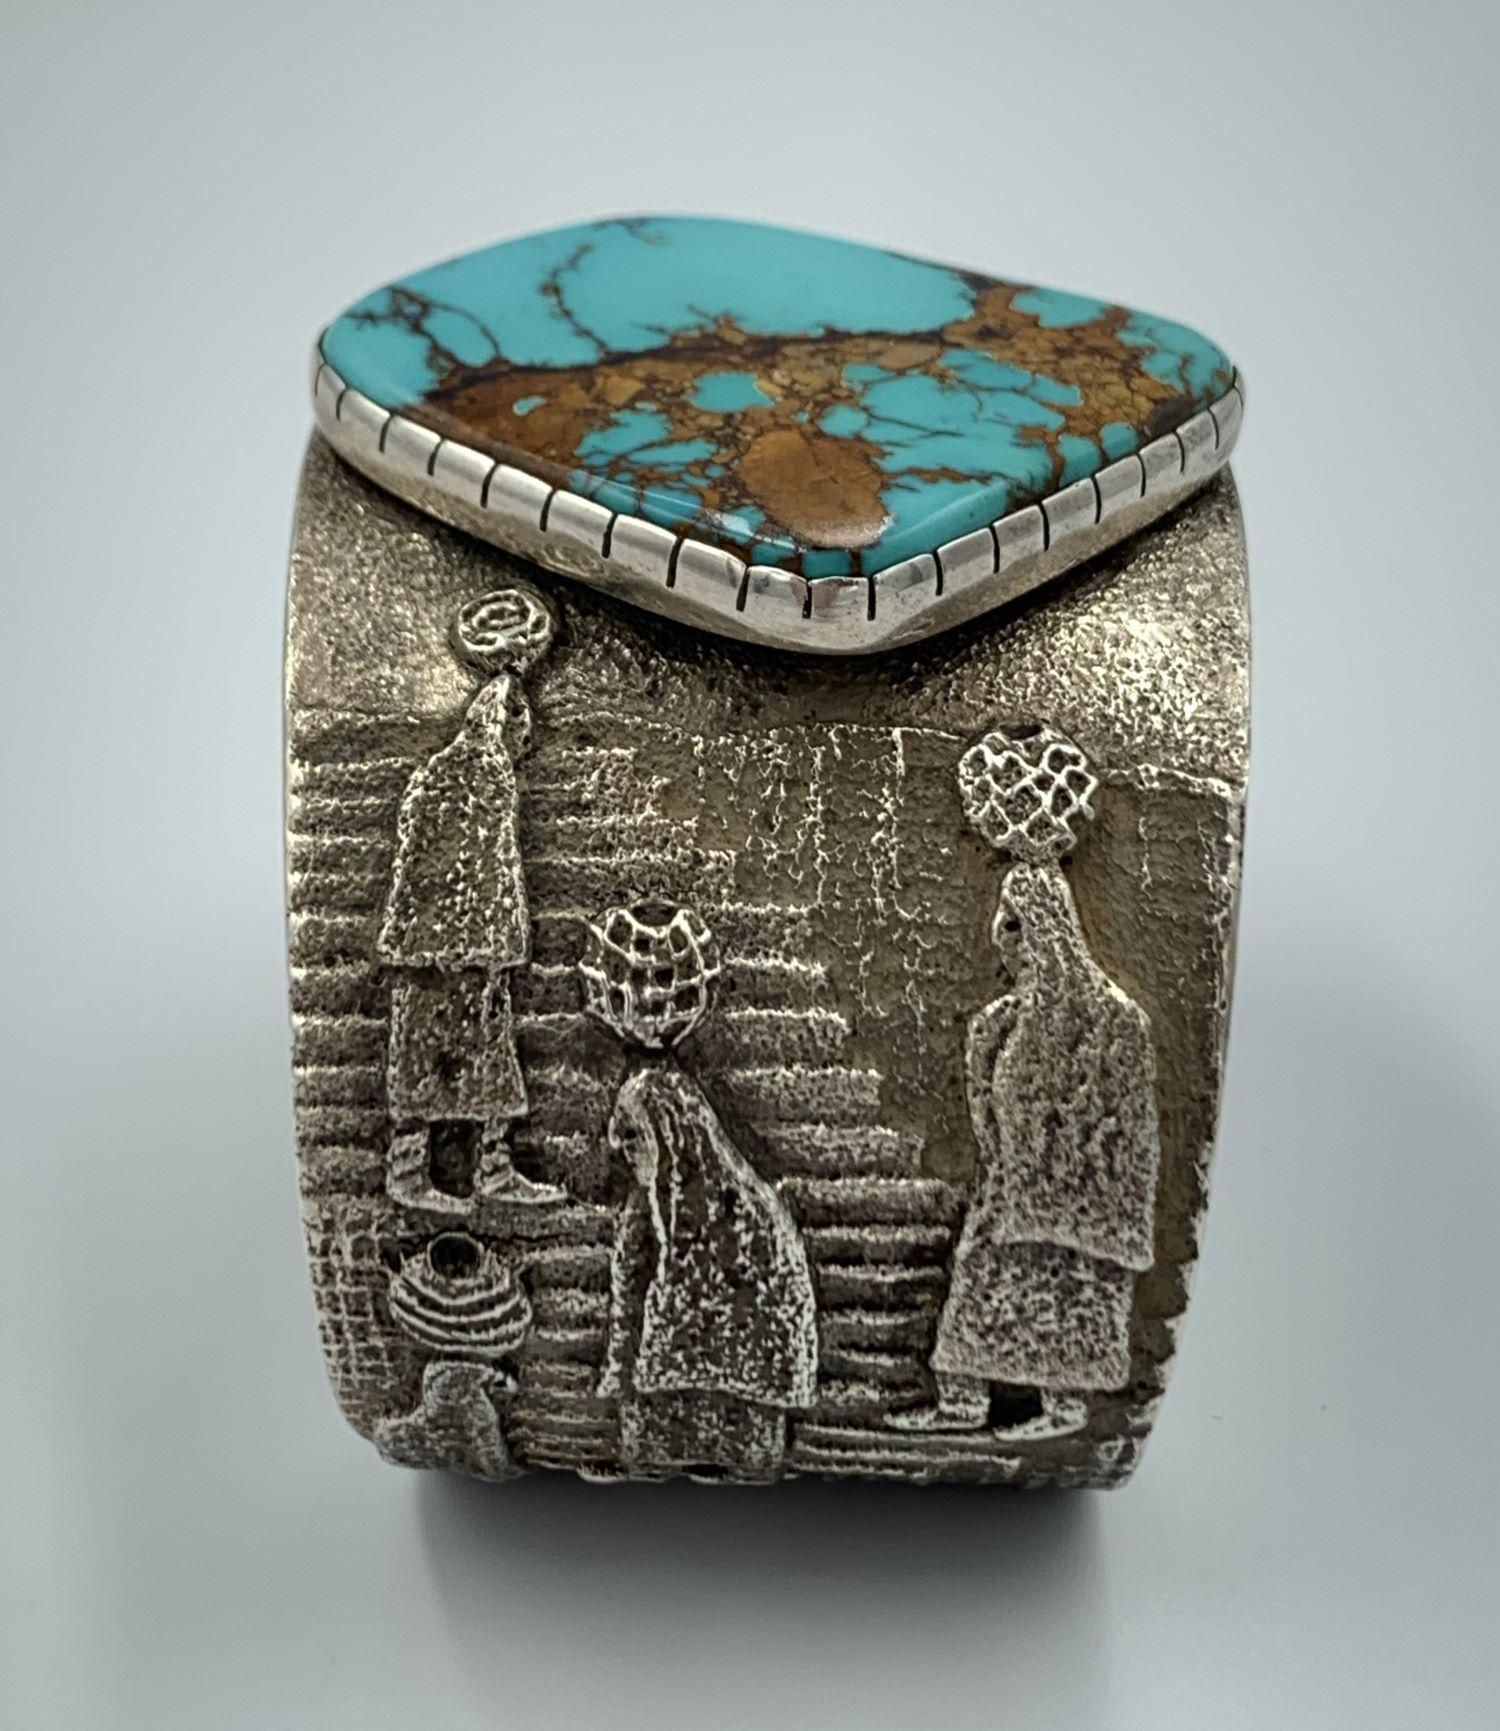 Water Carrier Cuff. Sterling Silver tufa cast cuff by noted Navajo silversmiths Darryl Dean and Rebecca Begay. The 1 3/4” cuff has a beautiful 1” x 1 3/4” turquoise stone. Seven Native American water carrier women are in bas relief. Native American